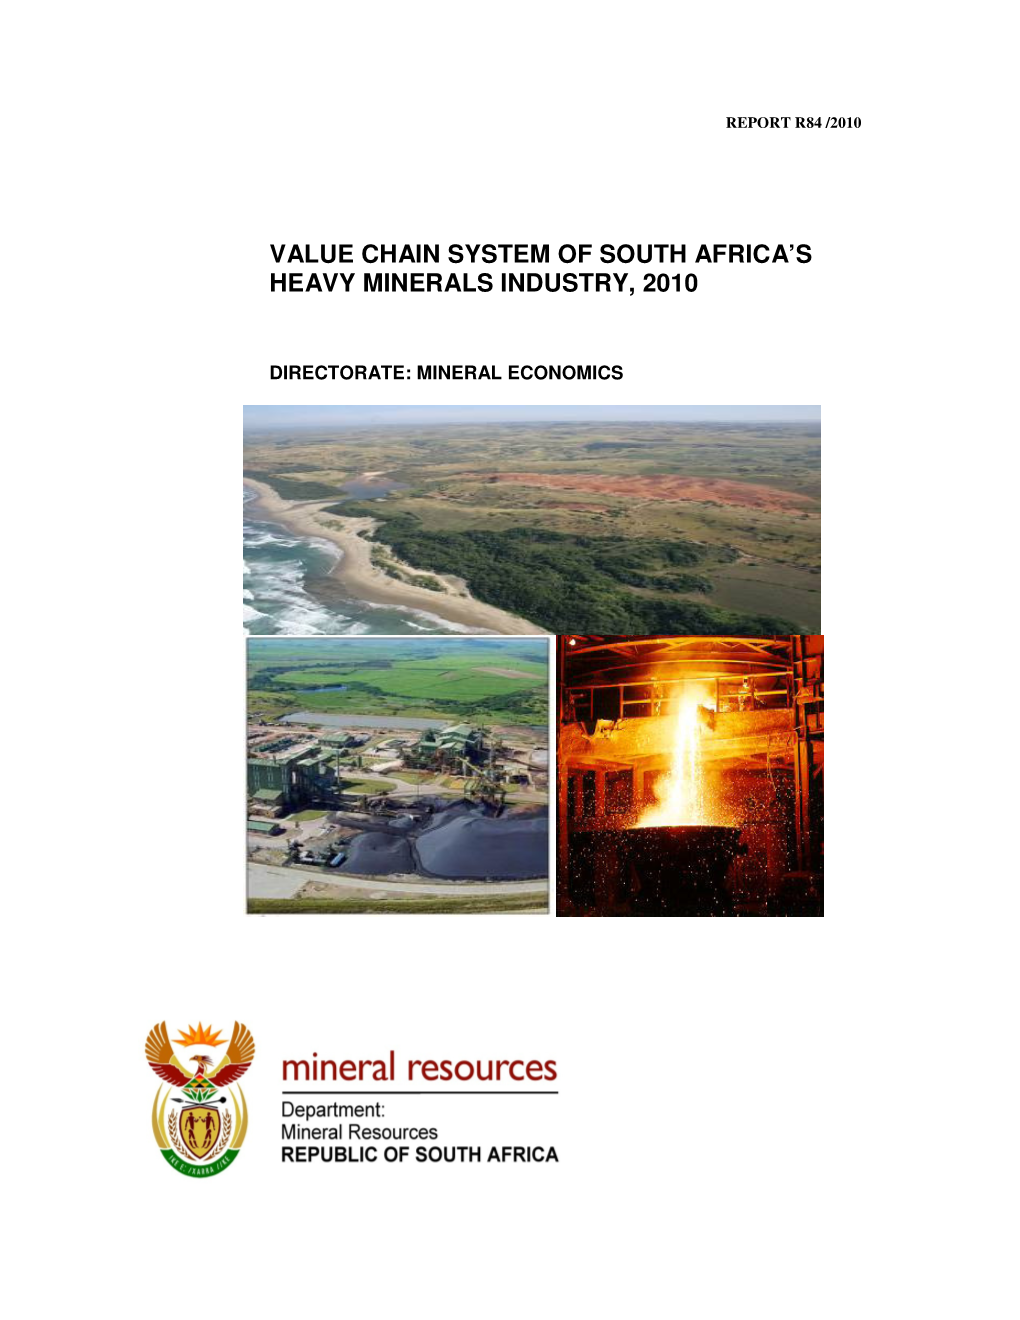 Value Chain System of South Africa's Heavy Minerals Industry, 2010